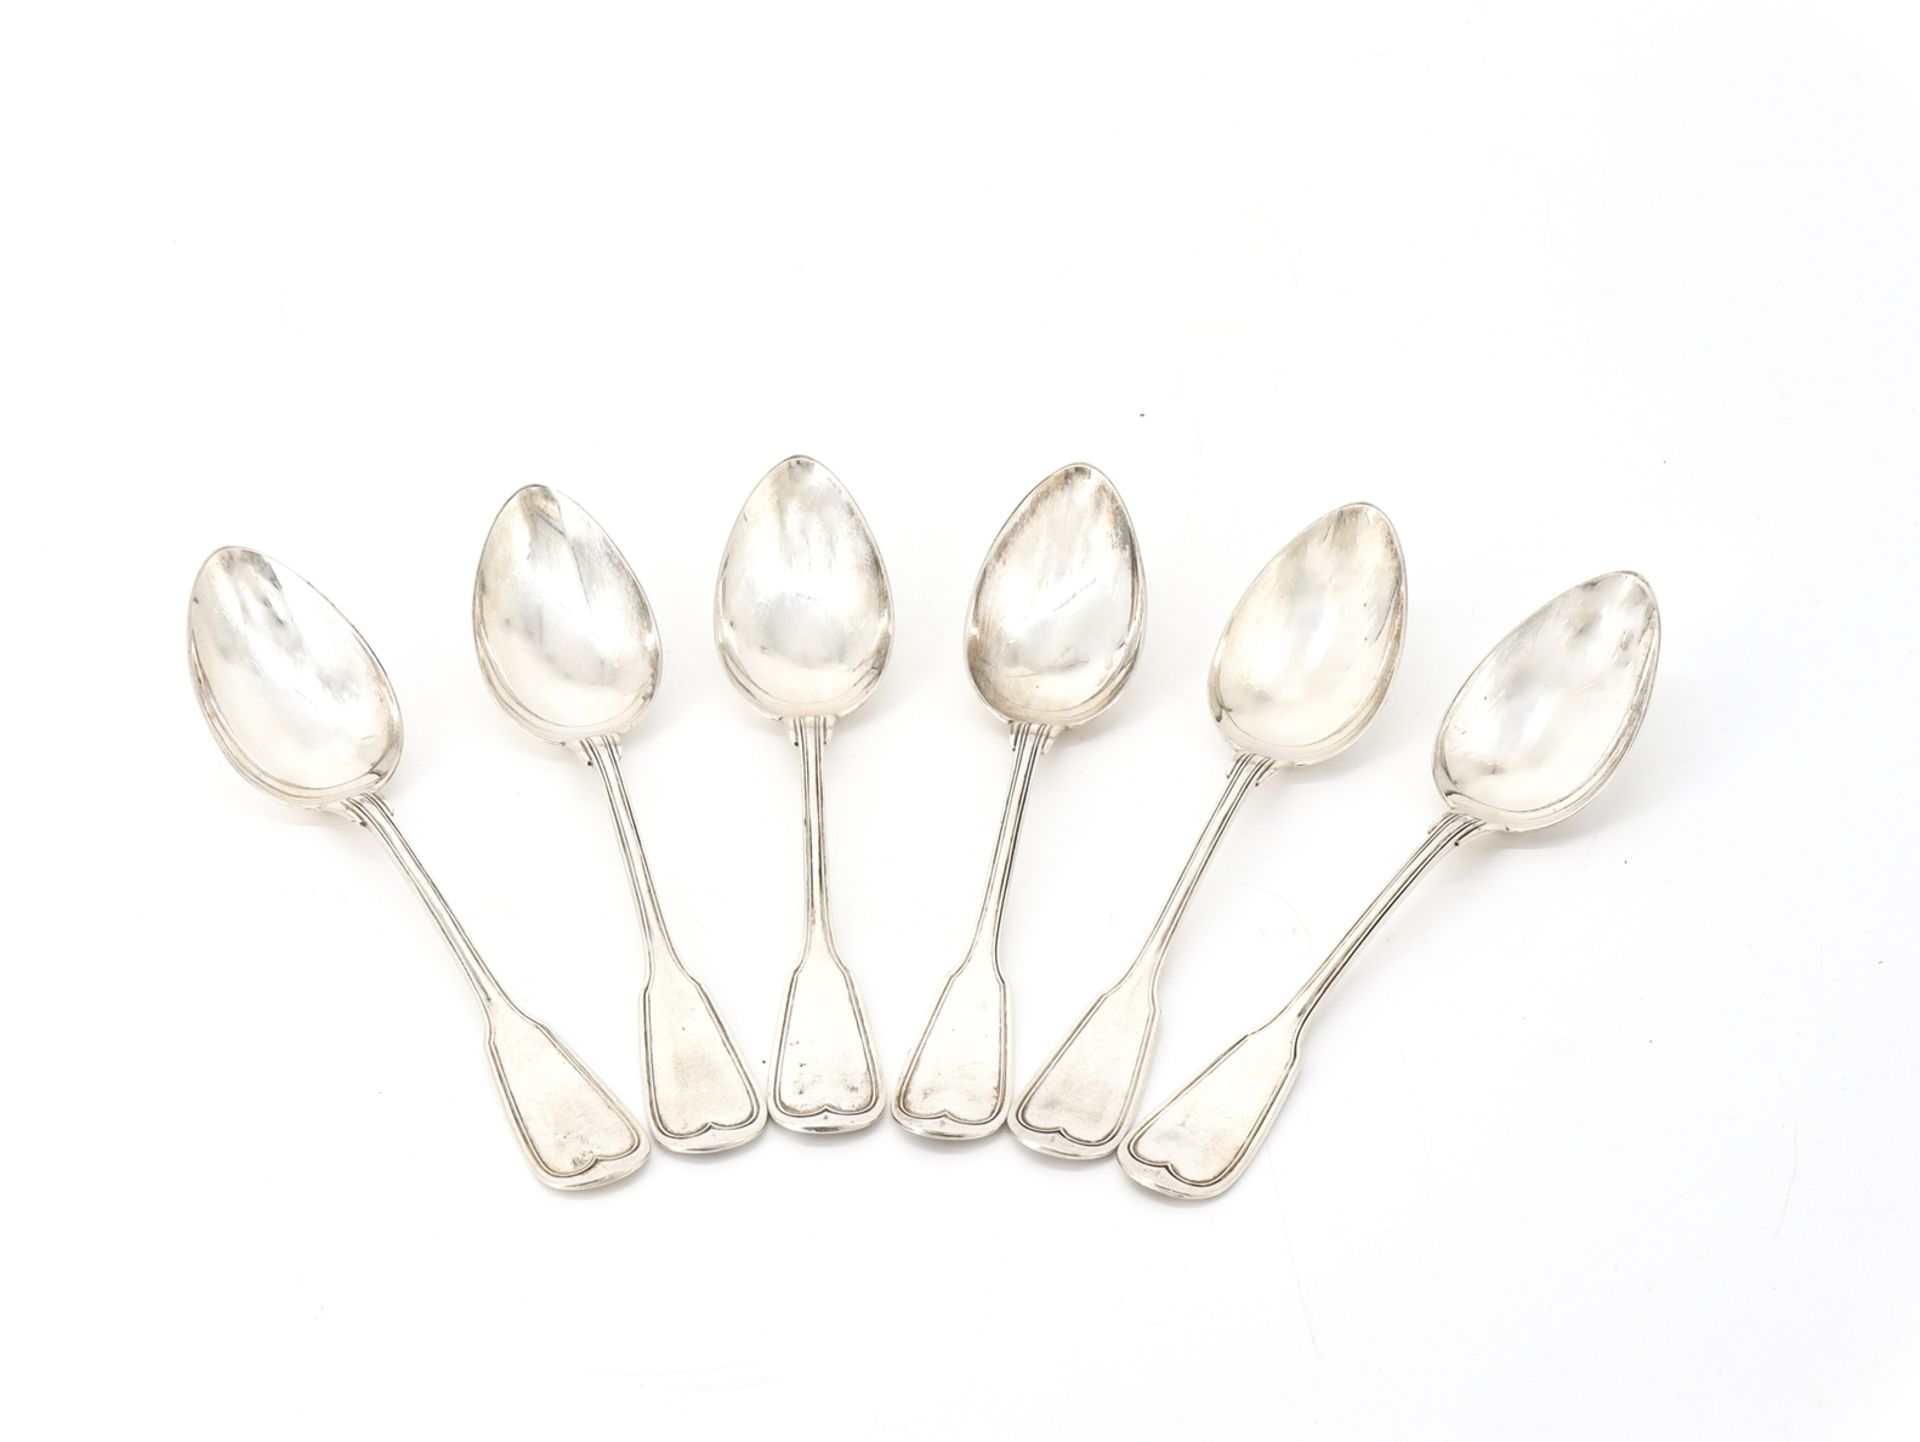 6 large silver spoons, Augsburg thread, 800 silver, around 1880 - Image 4 of 4